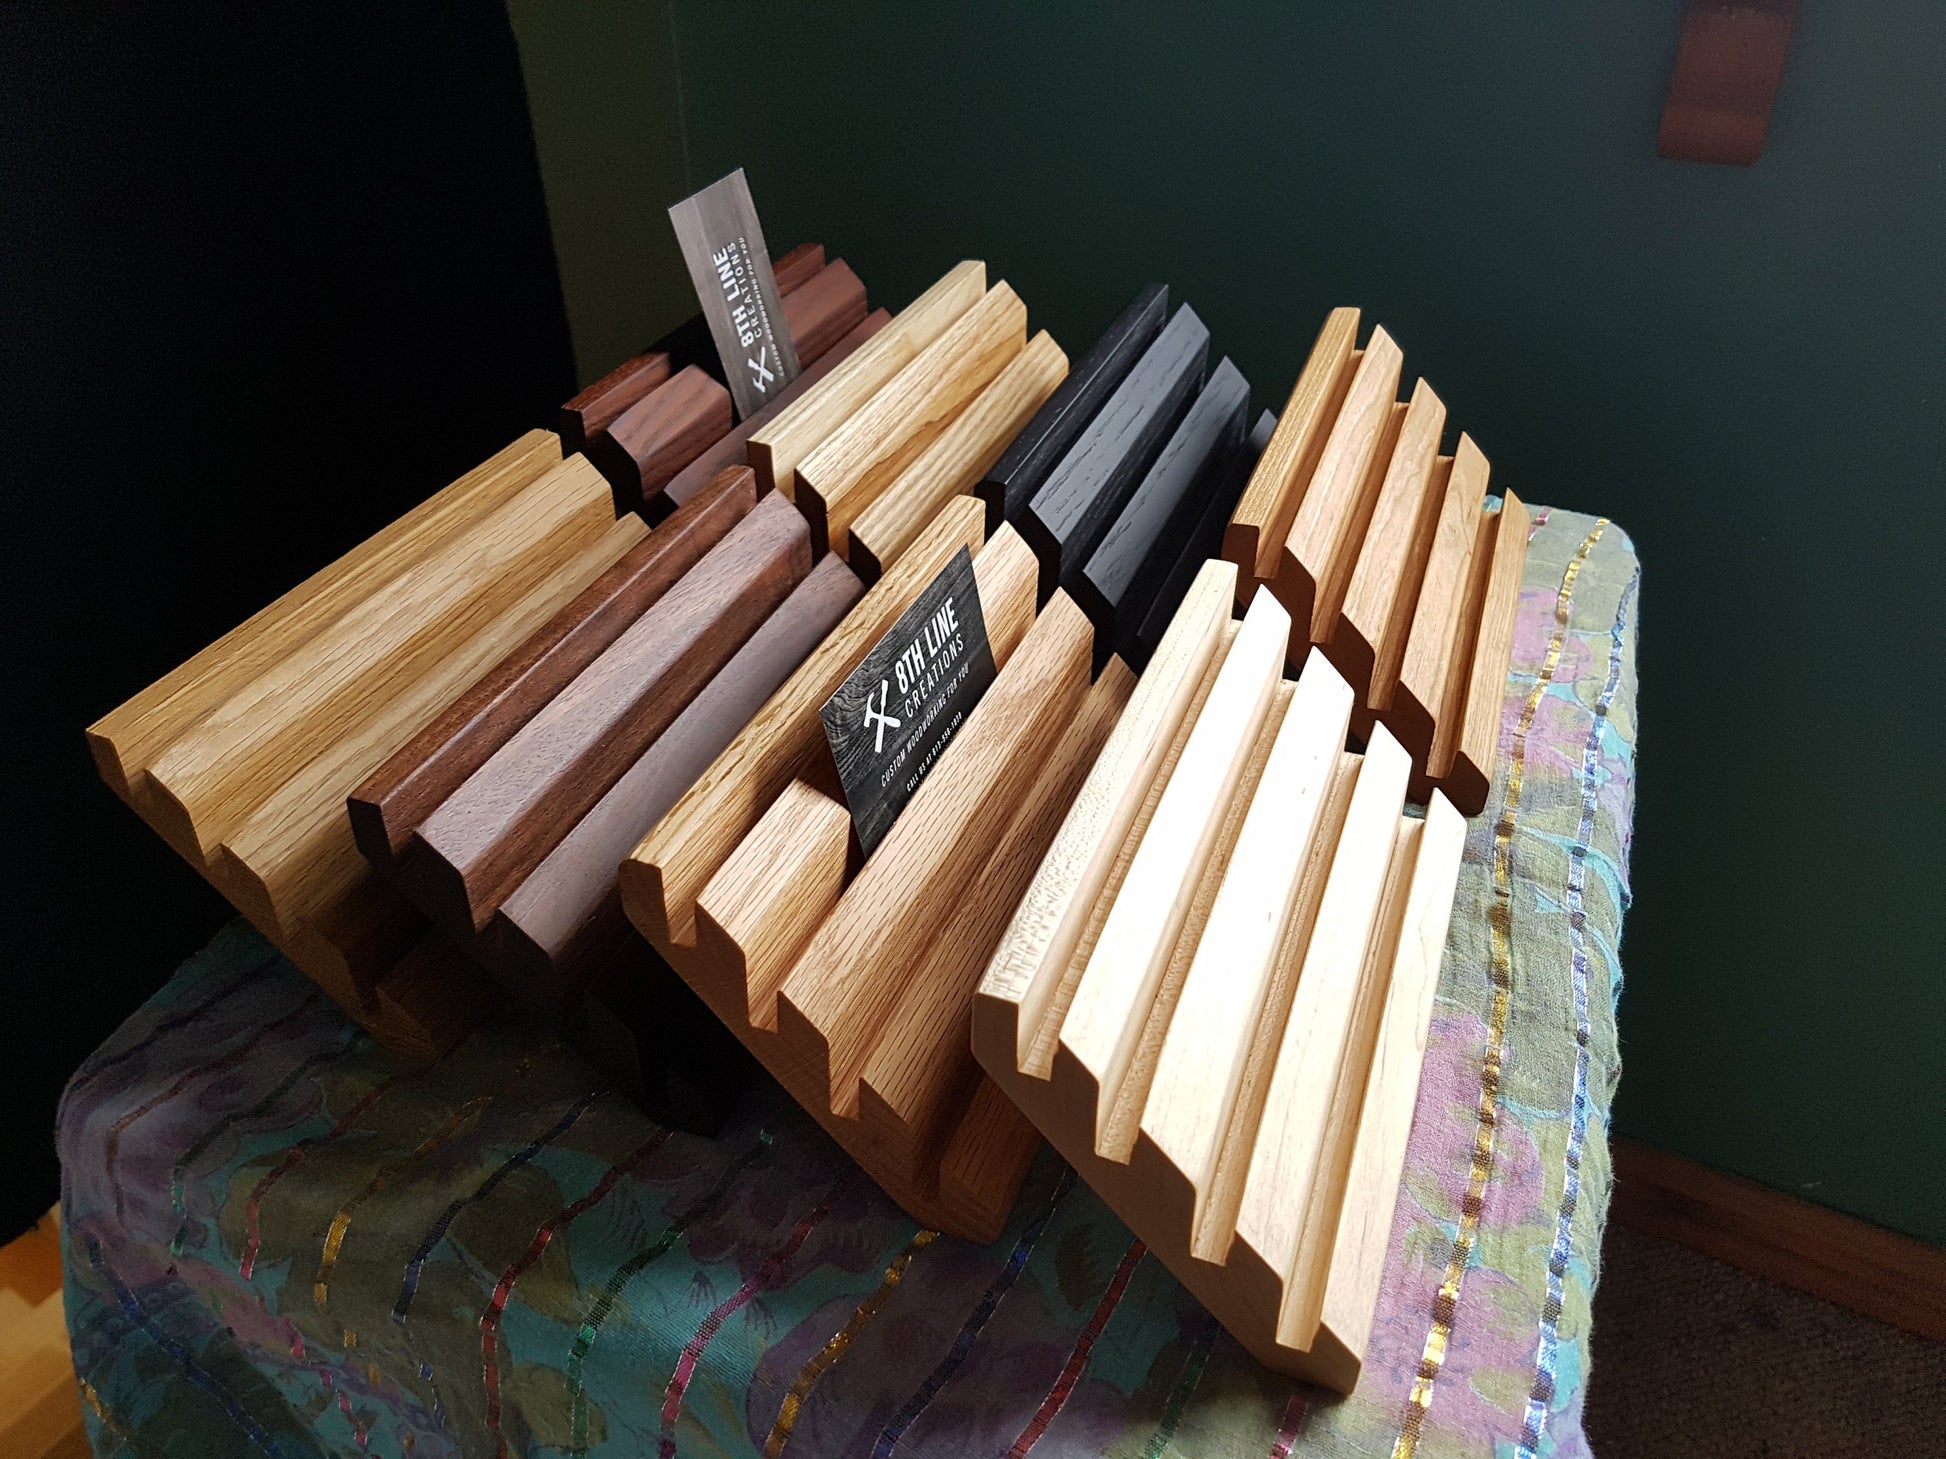 8 Card Wood Business Card Holder - Maple Business Card Holders 8th Line Creations 